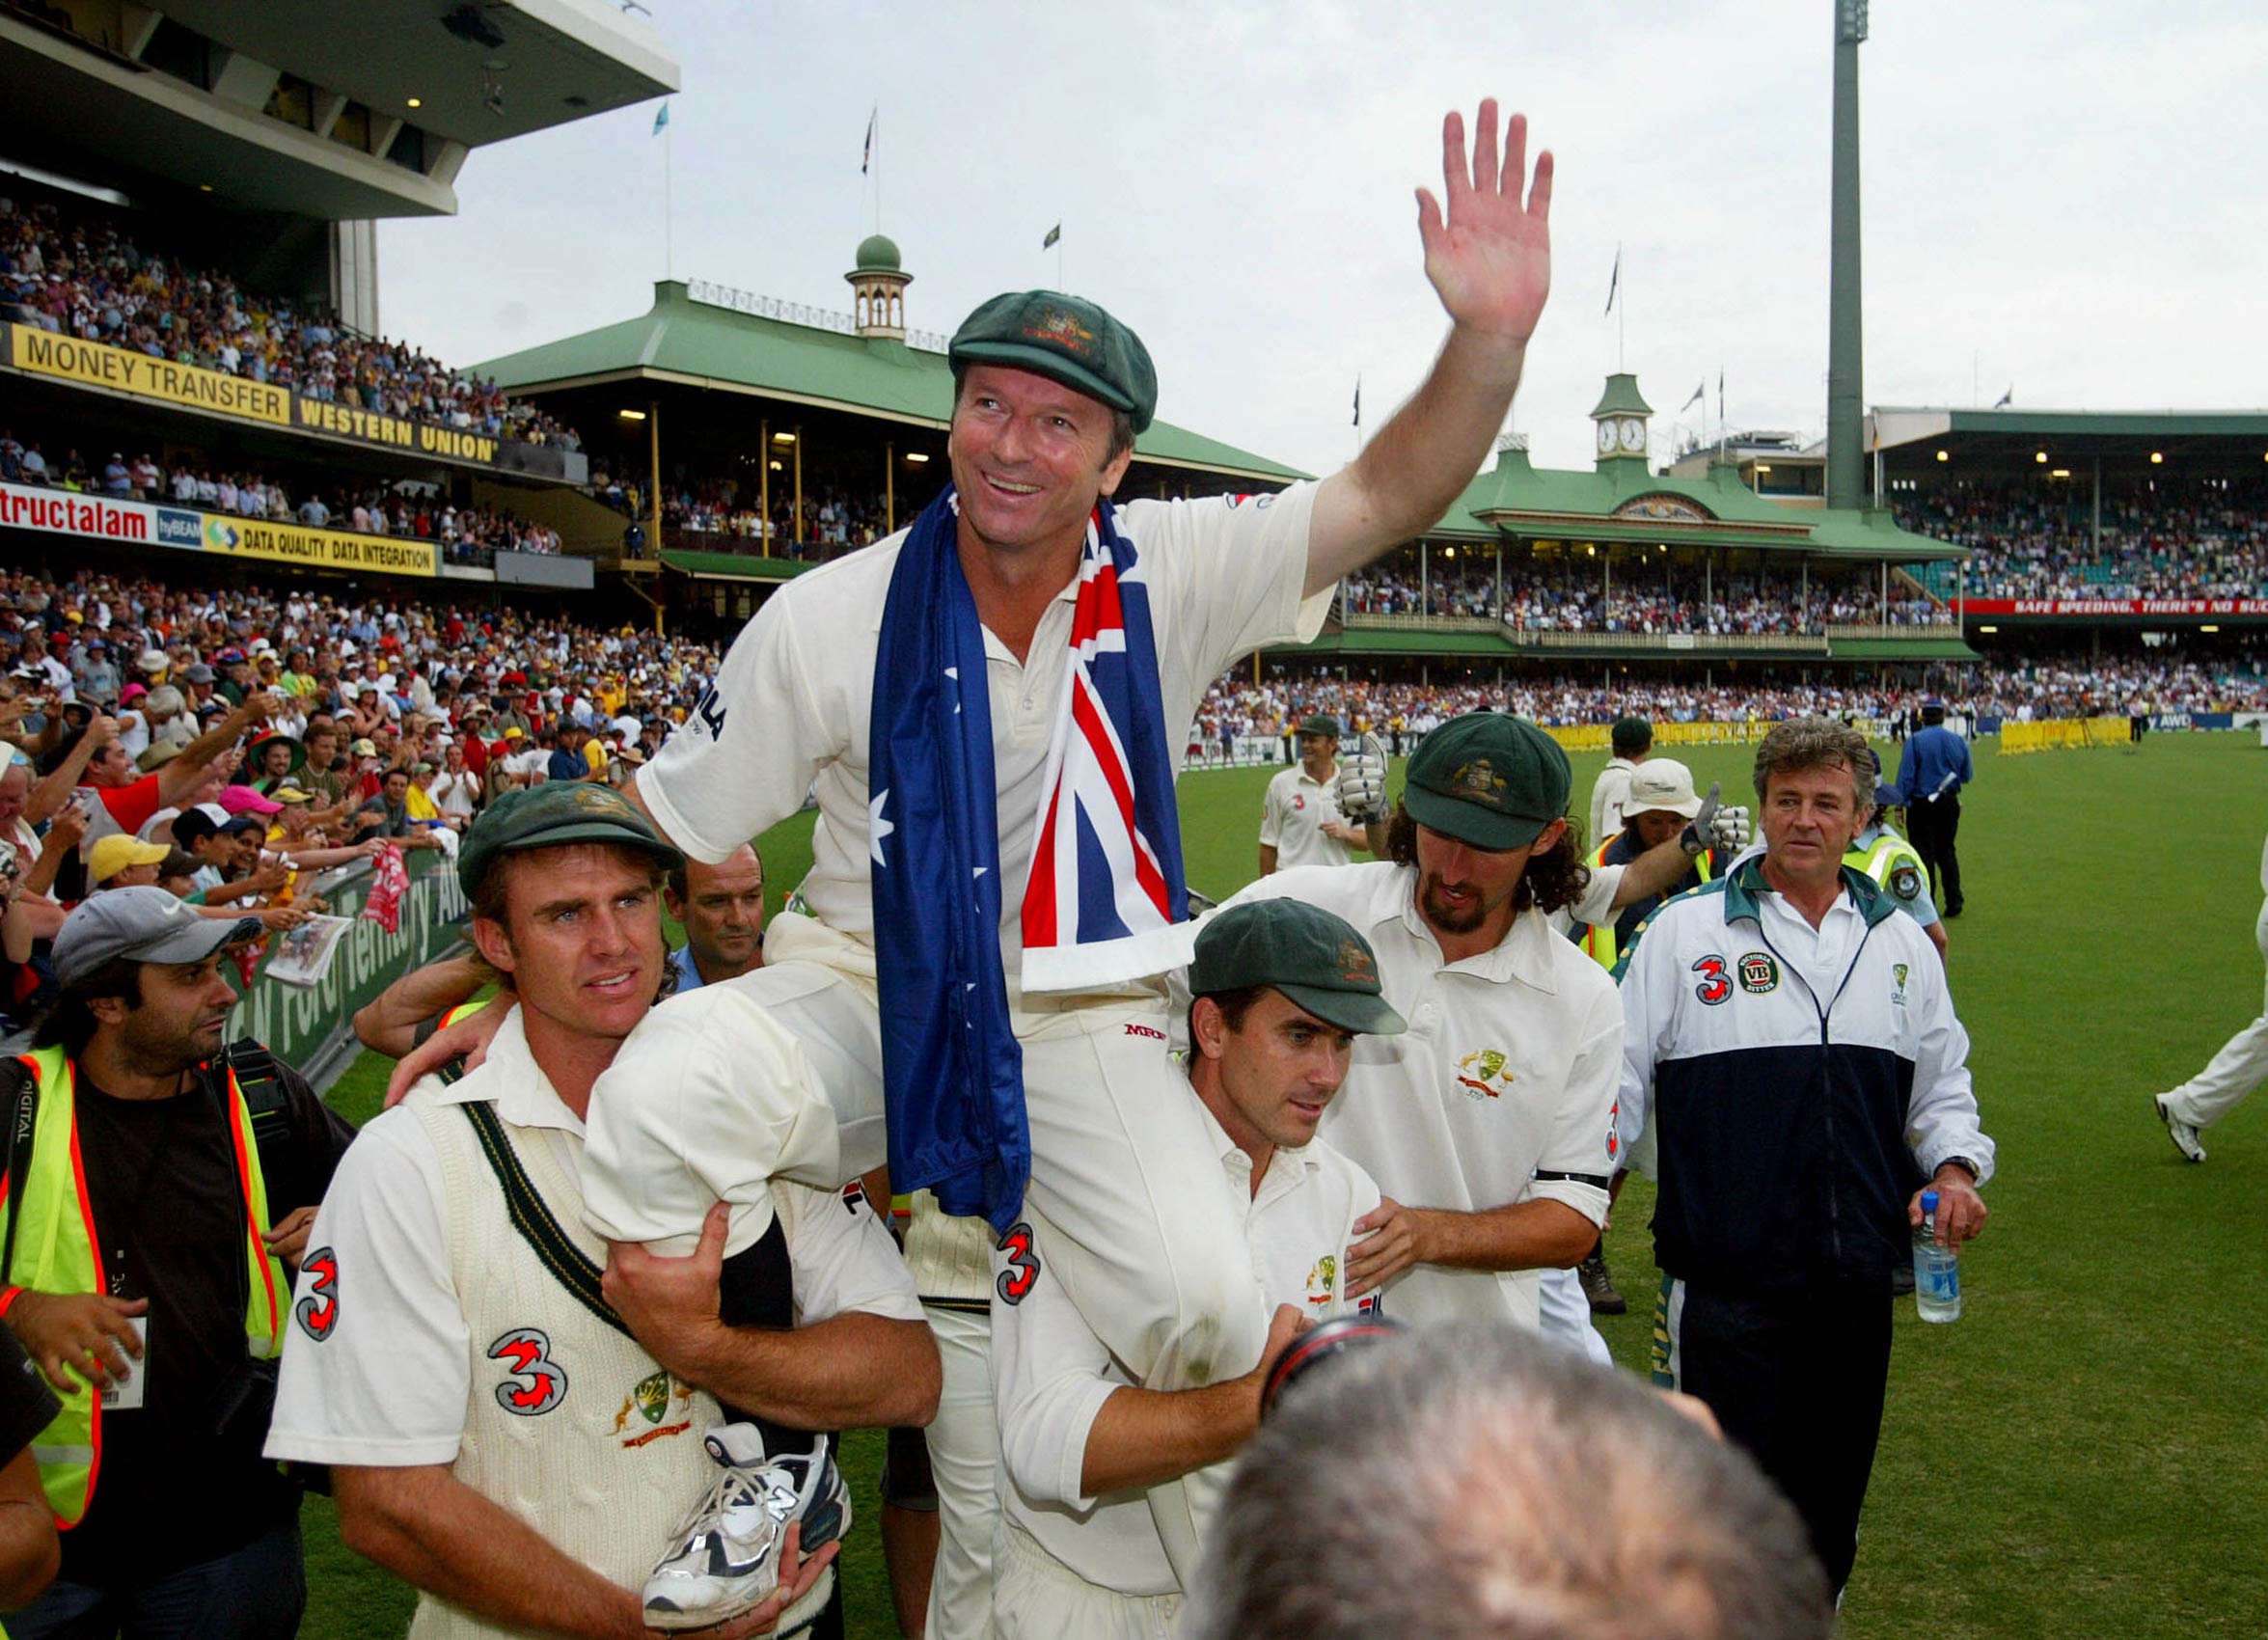 JANUARY 6, 2004: Retiring captain Steve Waugh is chaired on lap of honour around ground to thank fans following his last test, at conclusion of fourth test of Australia v India series at SCG in Sydney, 06/01/04. Pic Phil Hillyard.
Cricket